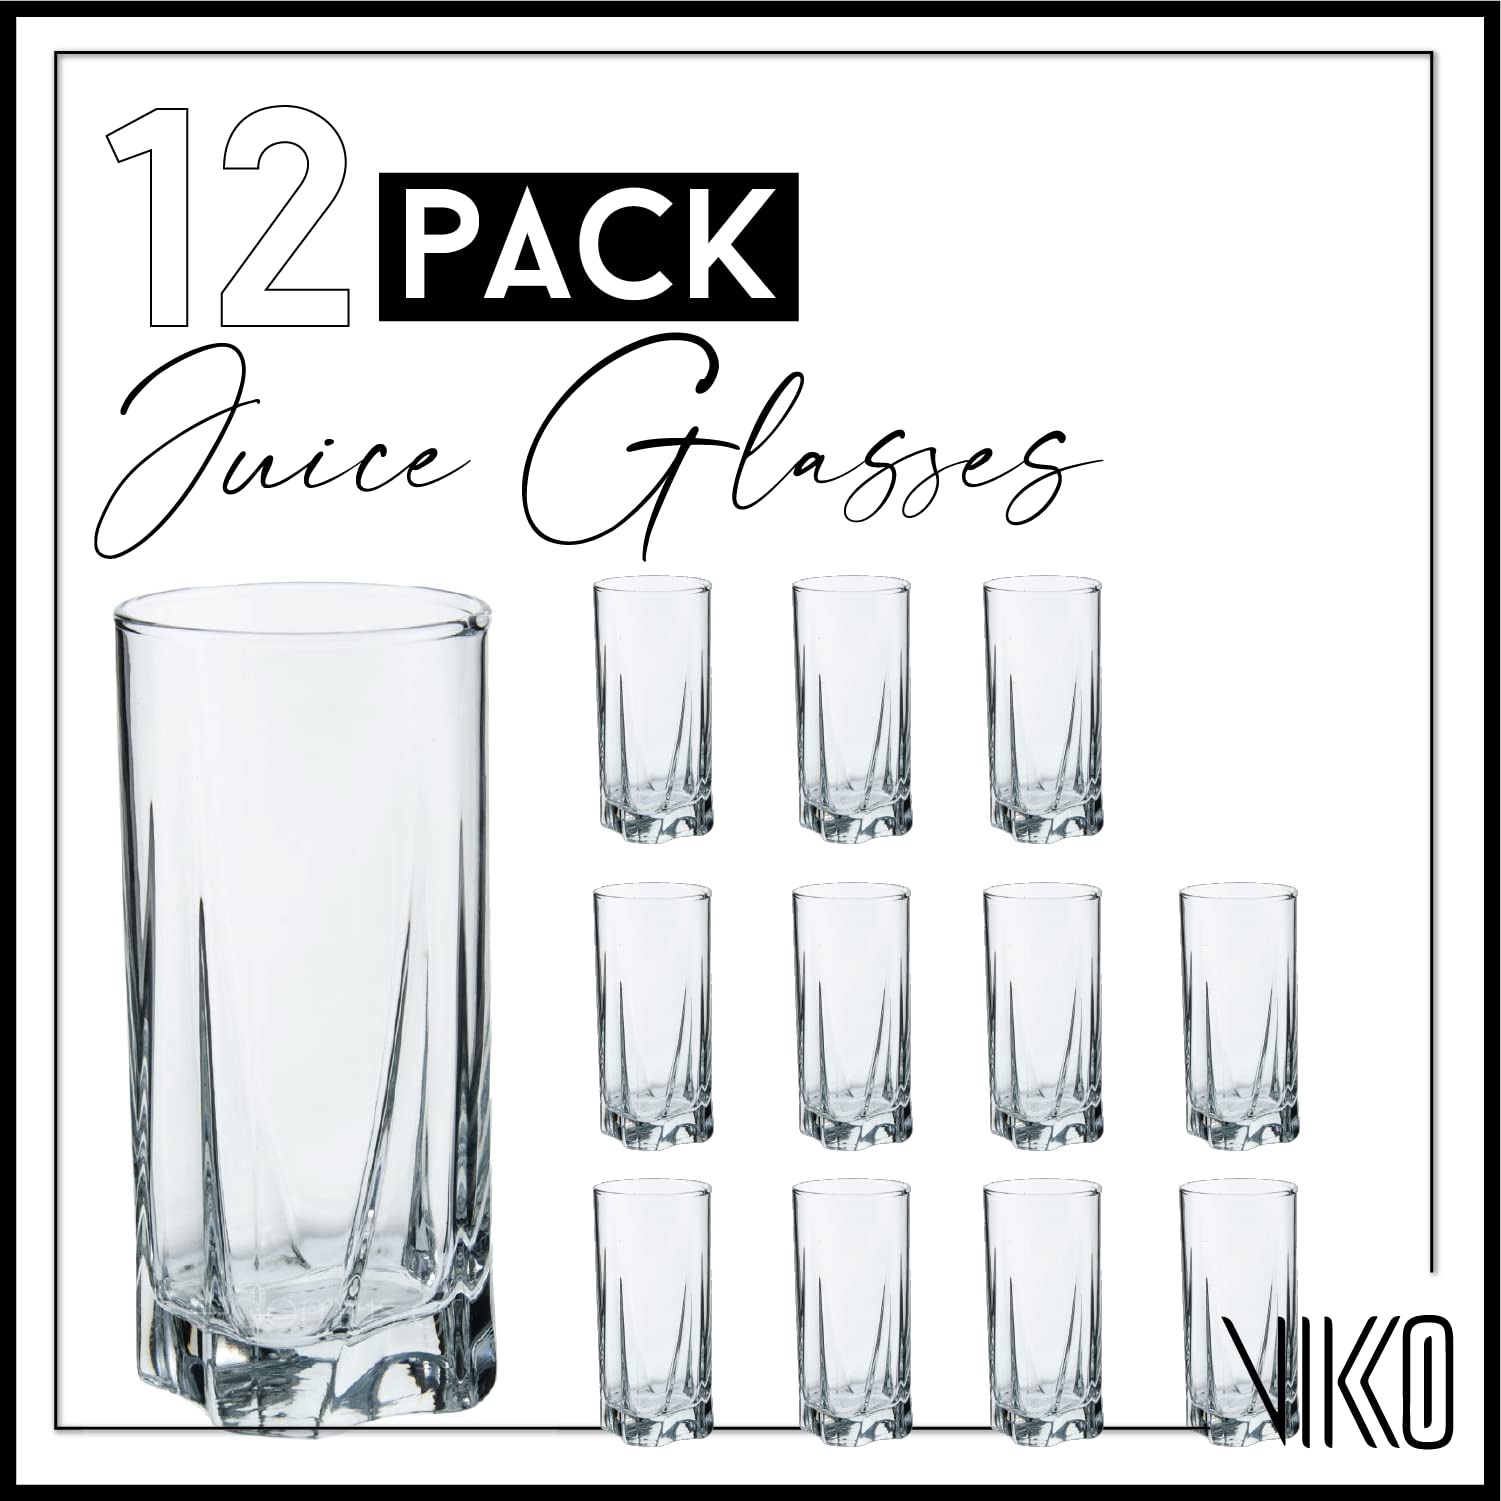 Vikko Drinking Glasses, 12 Oz Drinking Glasses Set of 12, Crystal Clear Glass Cups for Water or Juice, Highball Glass Tumbler & 